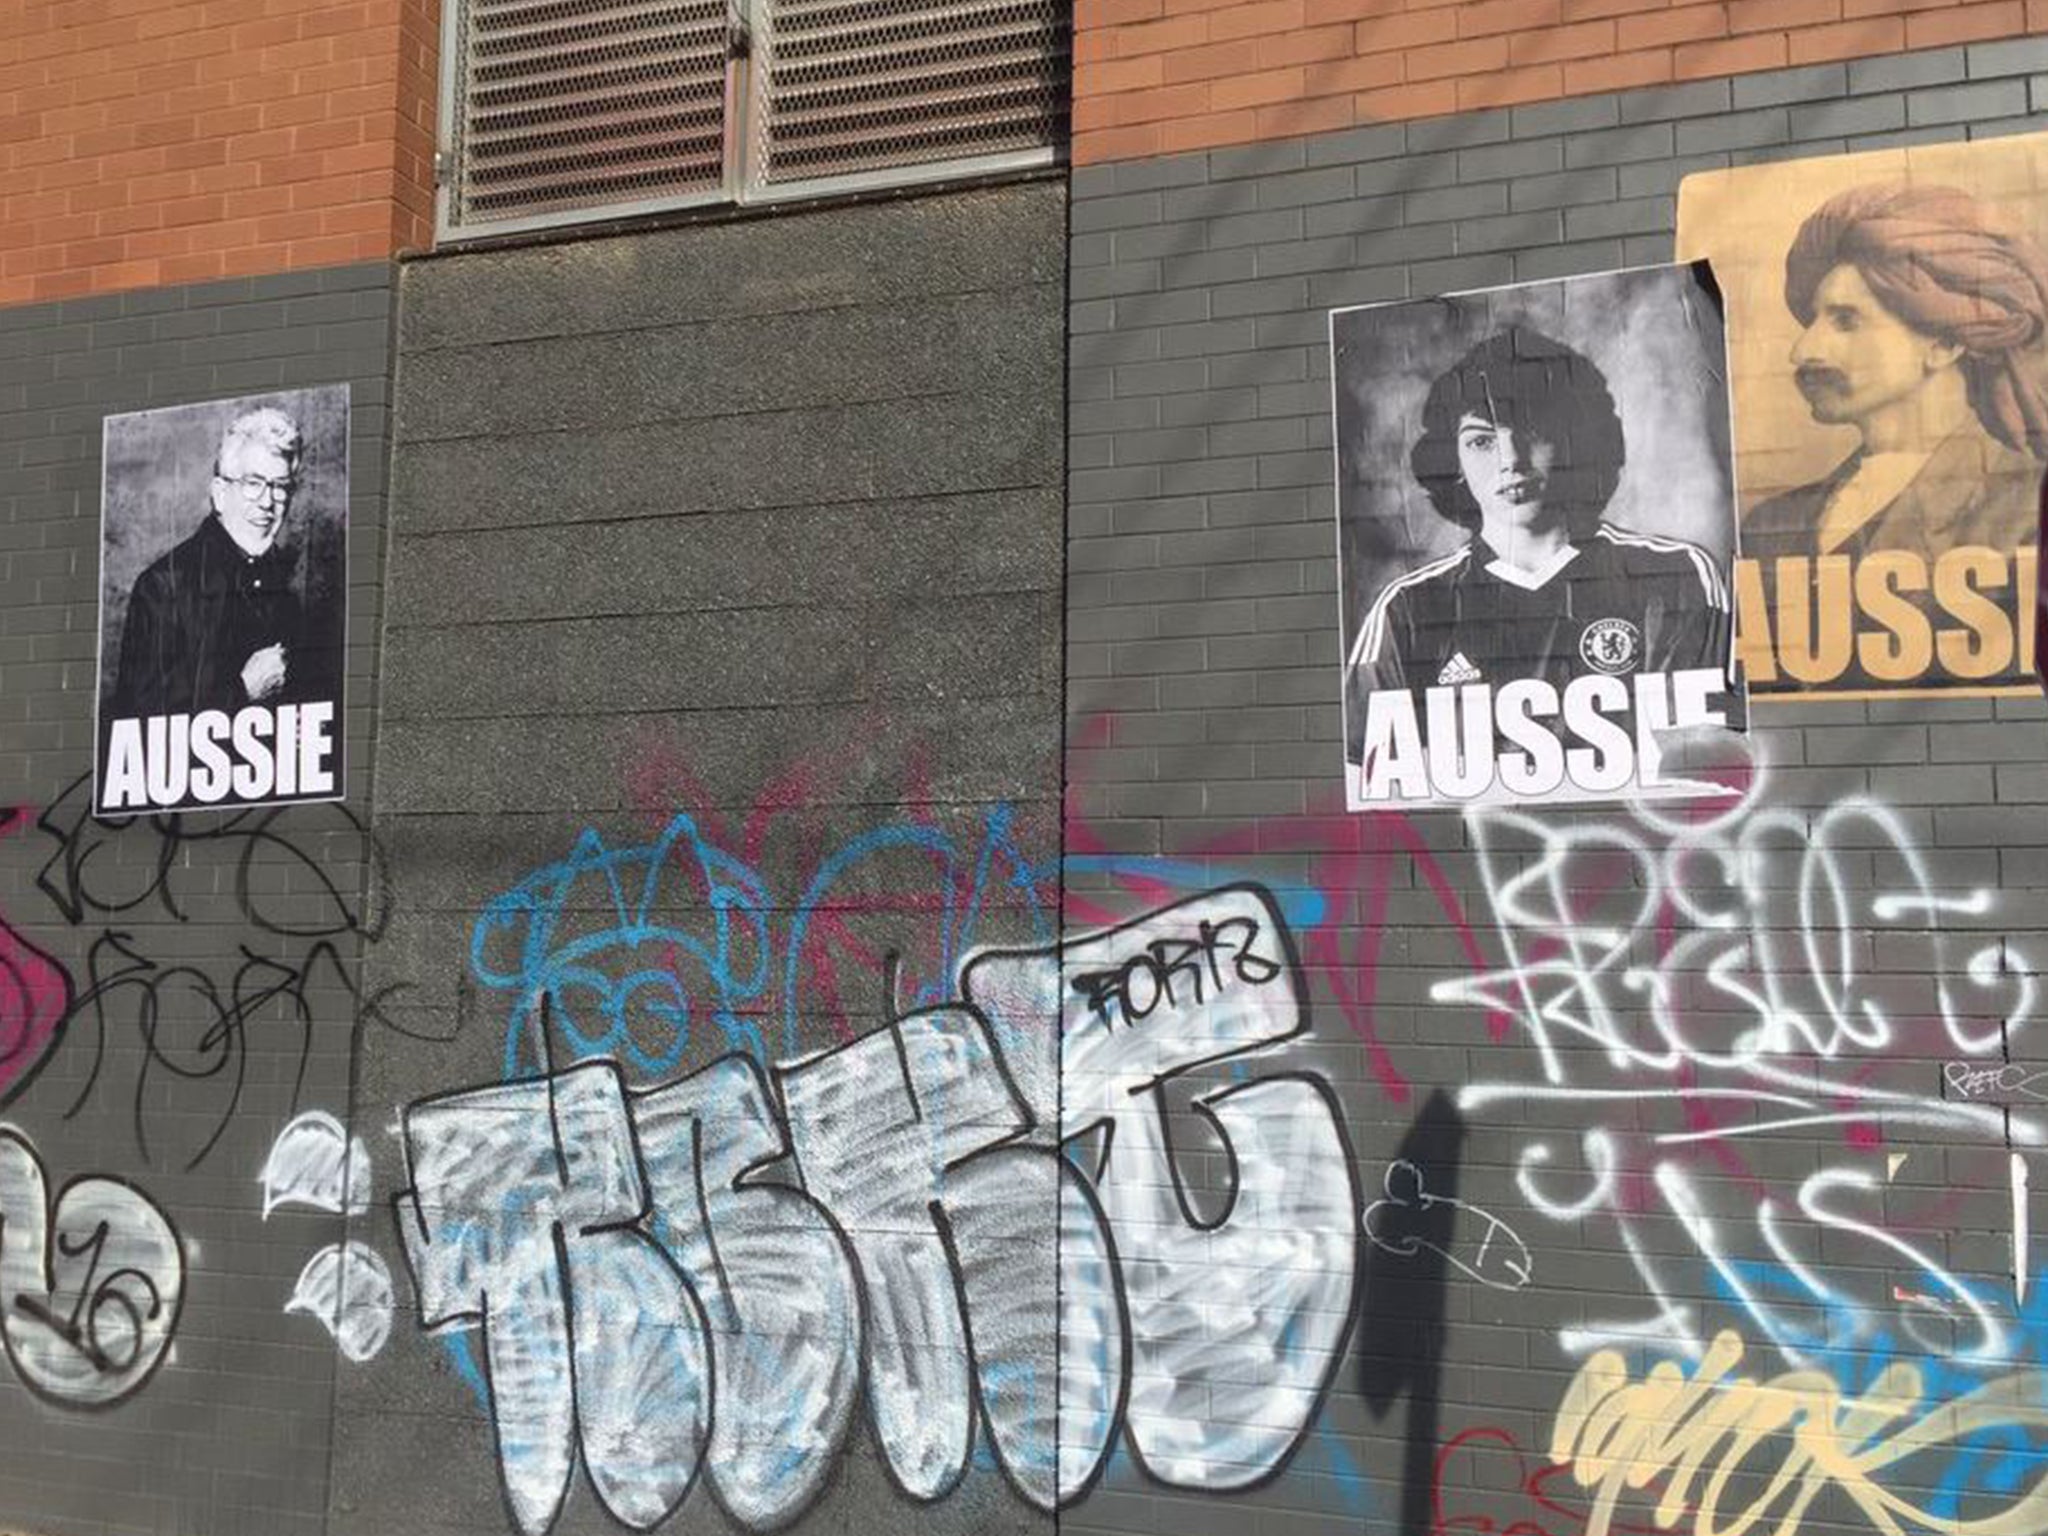 he posters show images of two of the most notorious criminals in recent Australian history